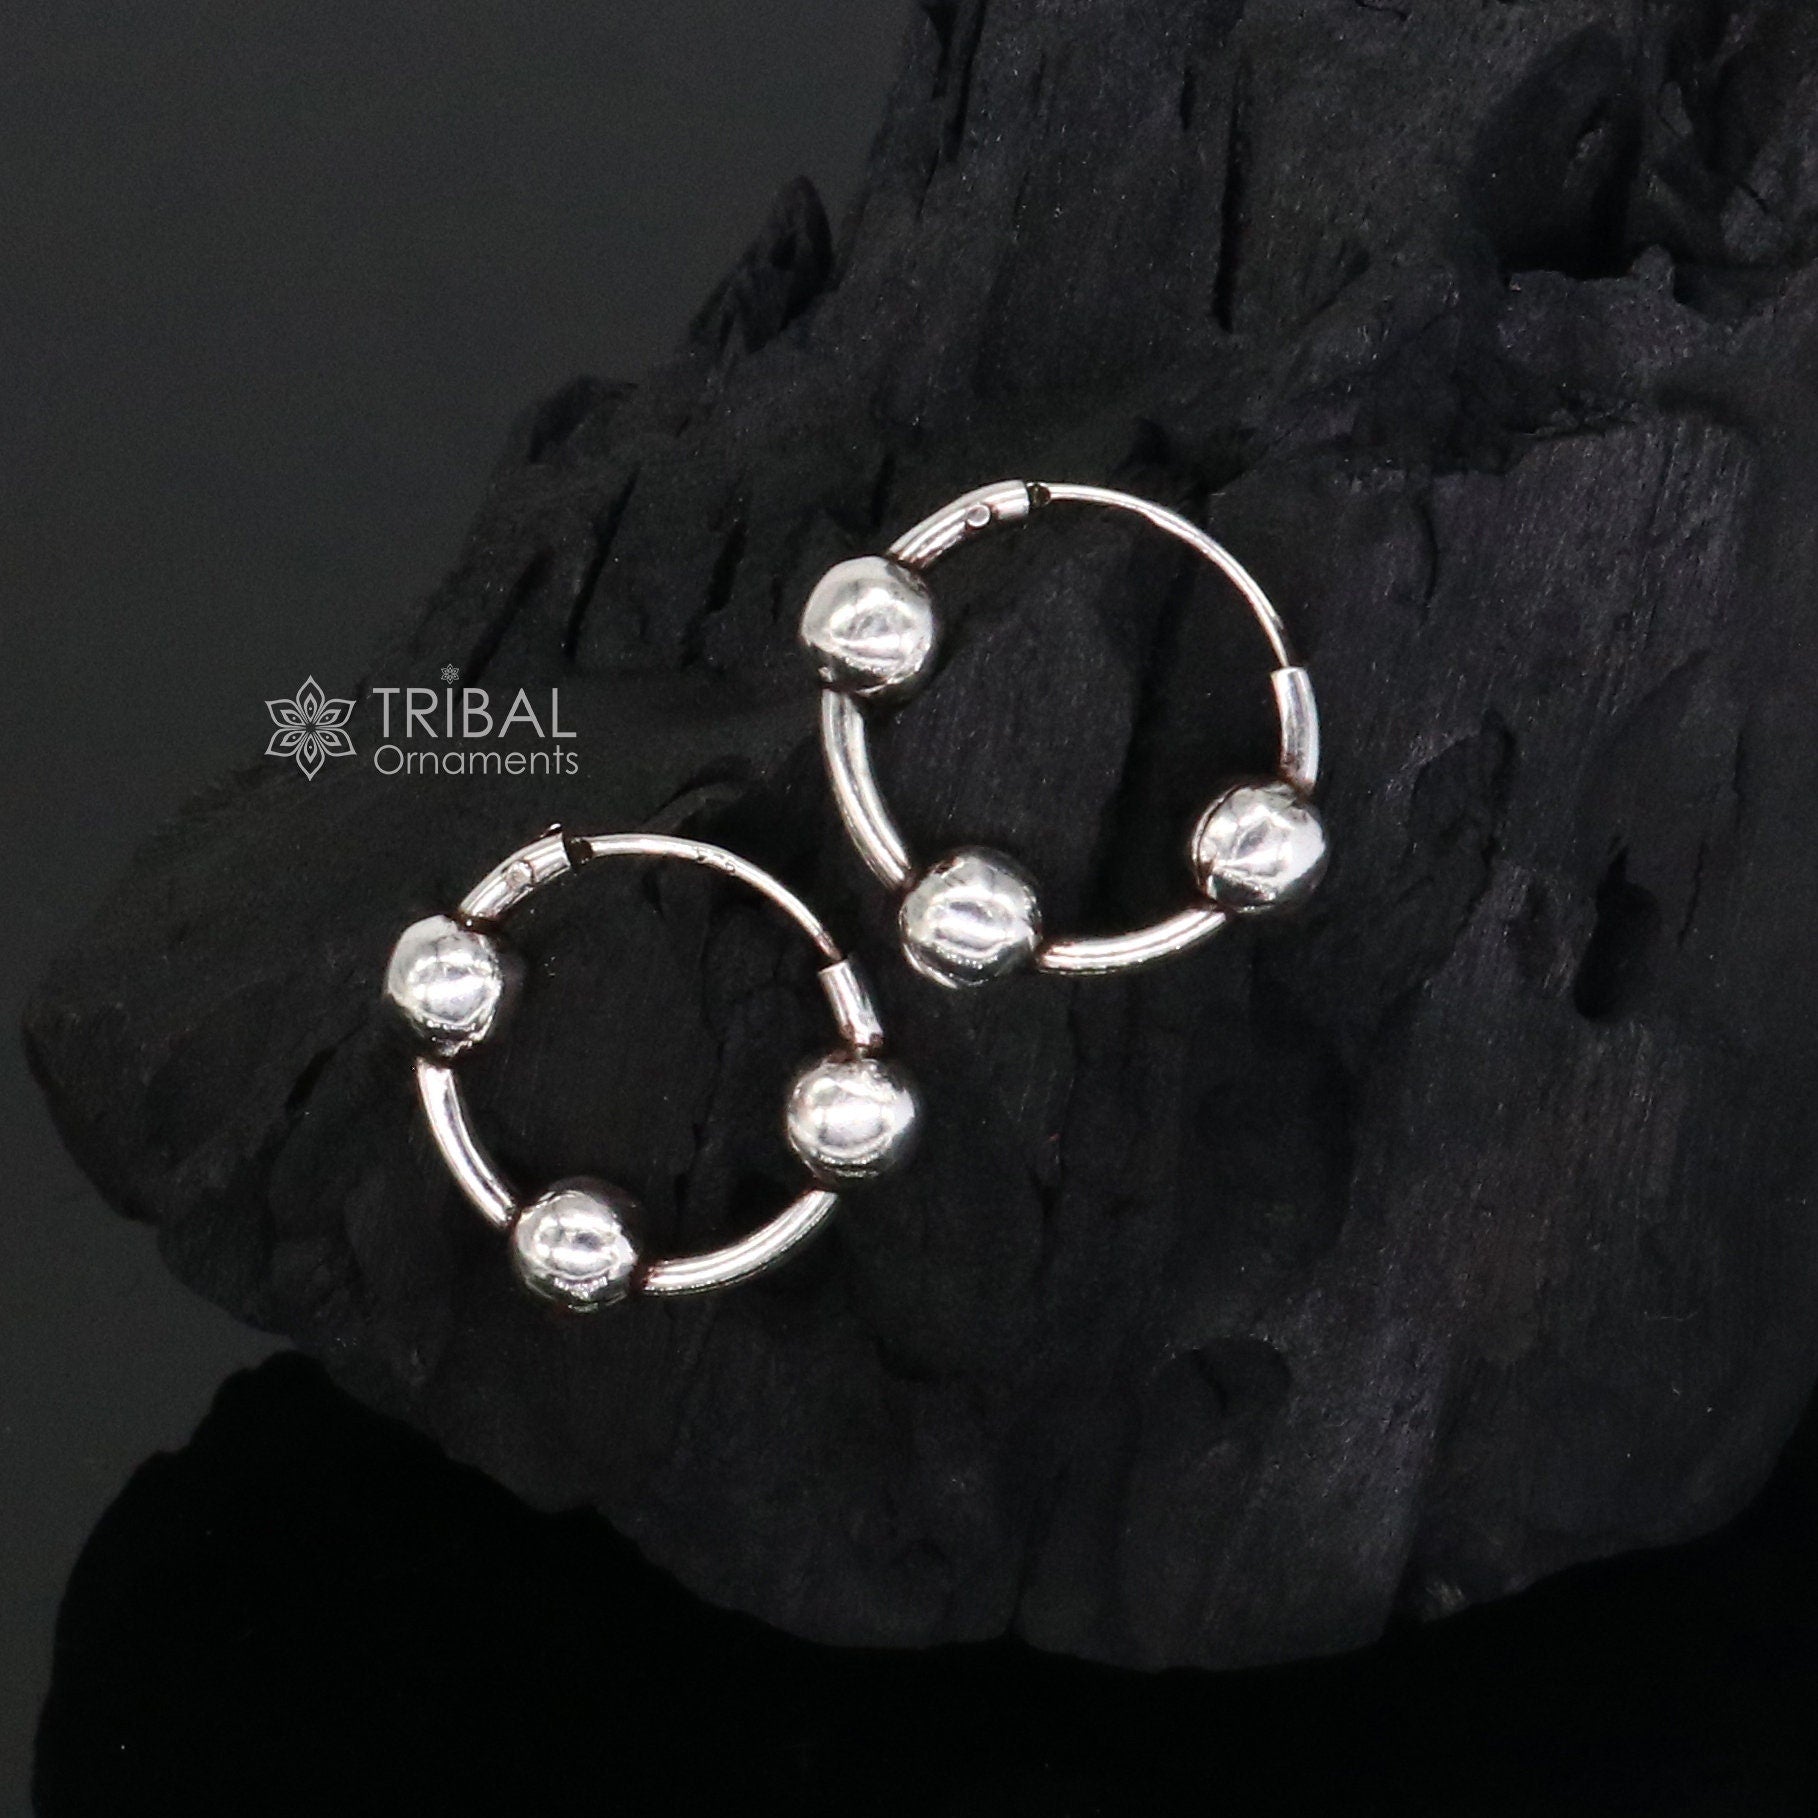 Exclusive new fancy stylish small  925 sterling silver handmade hoops earrings bali ,pretty gifting bali tribal jewelry india s1216 - TRIBAL ORNAMENTS